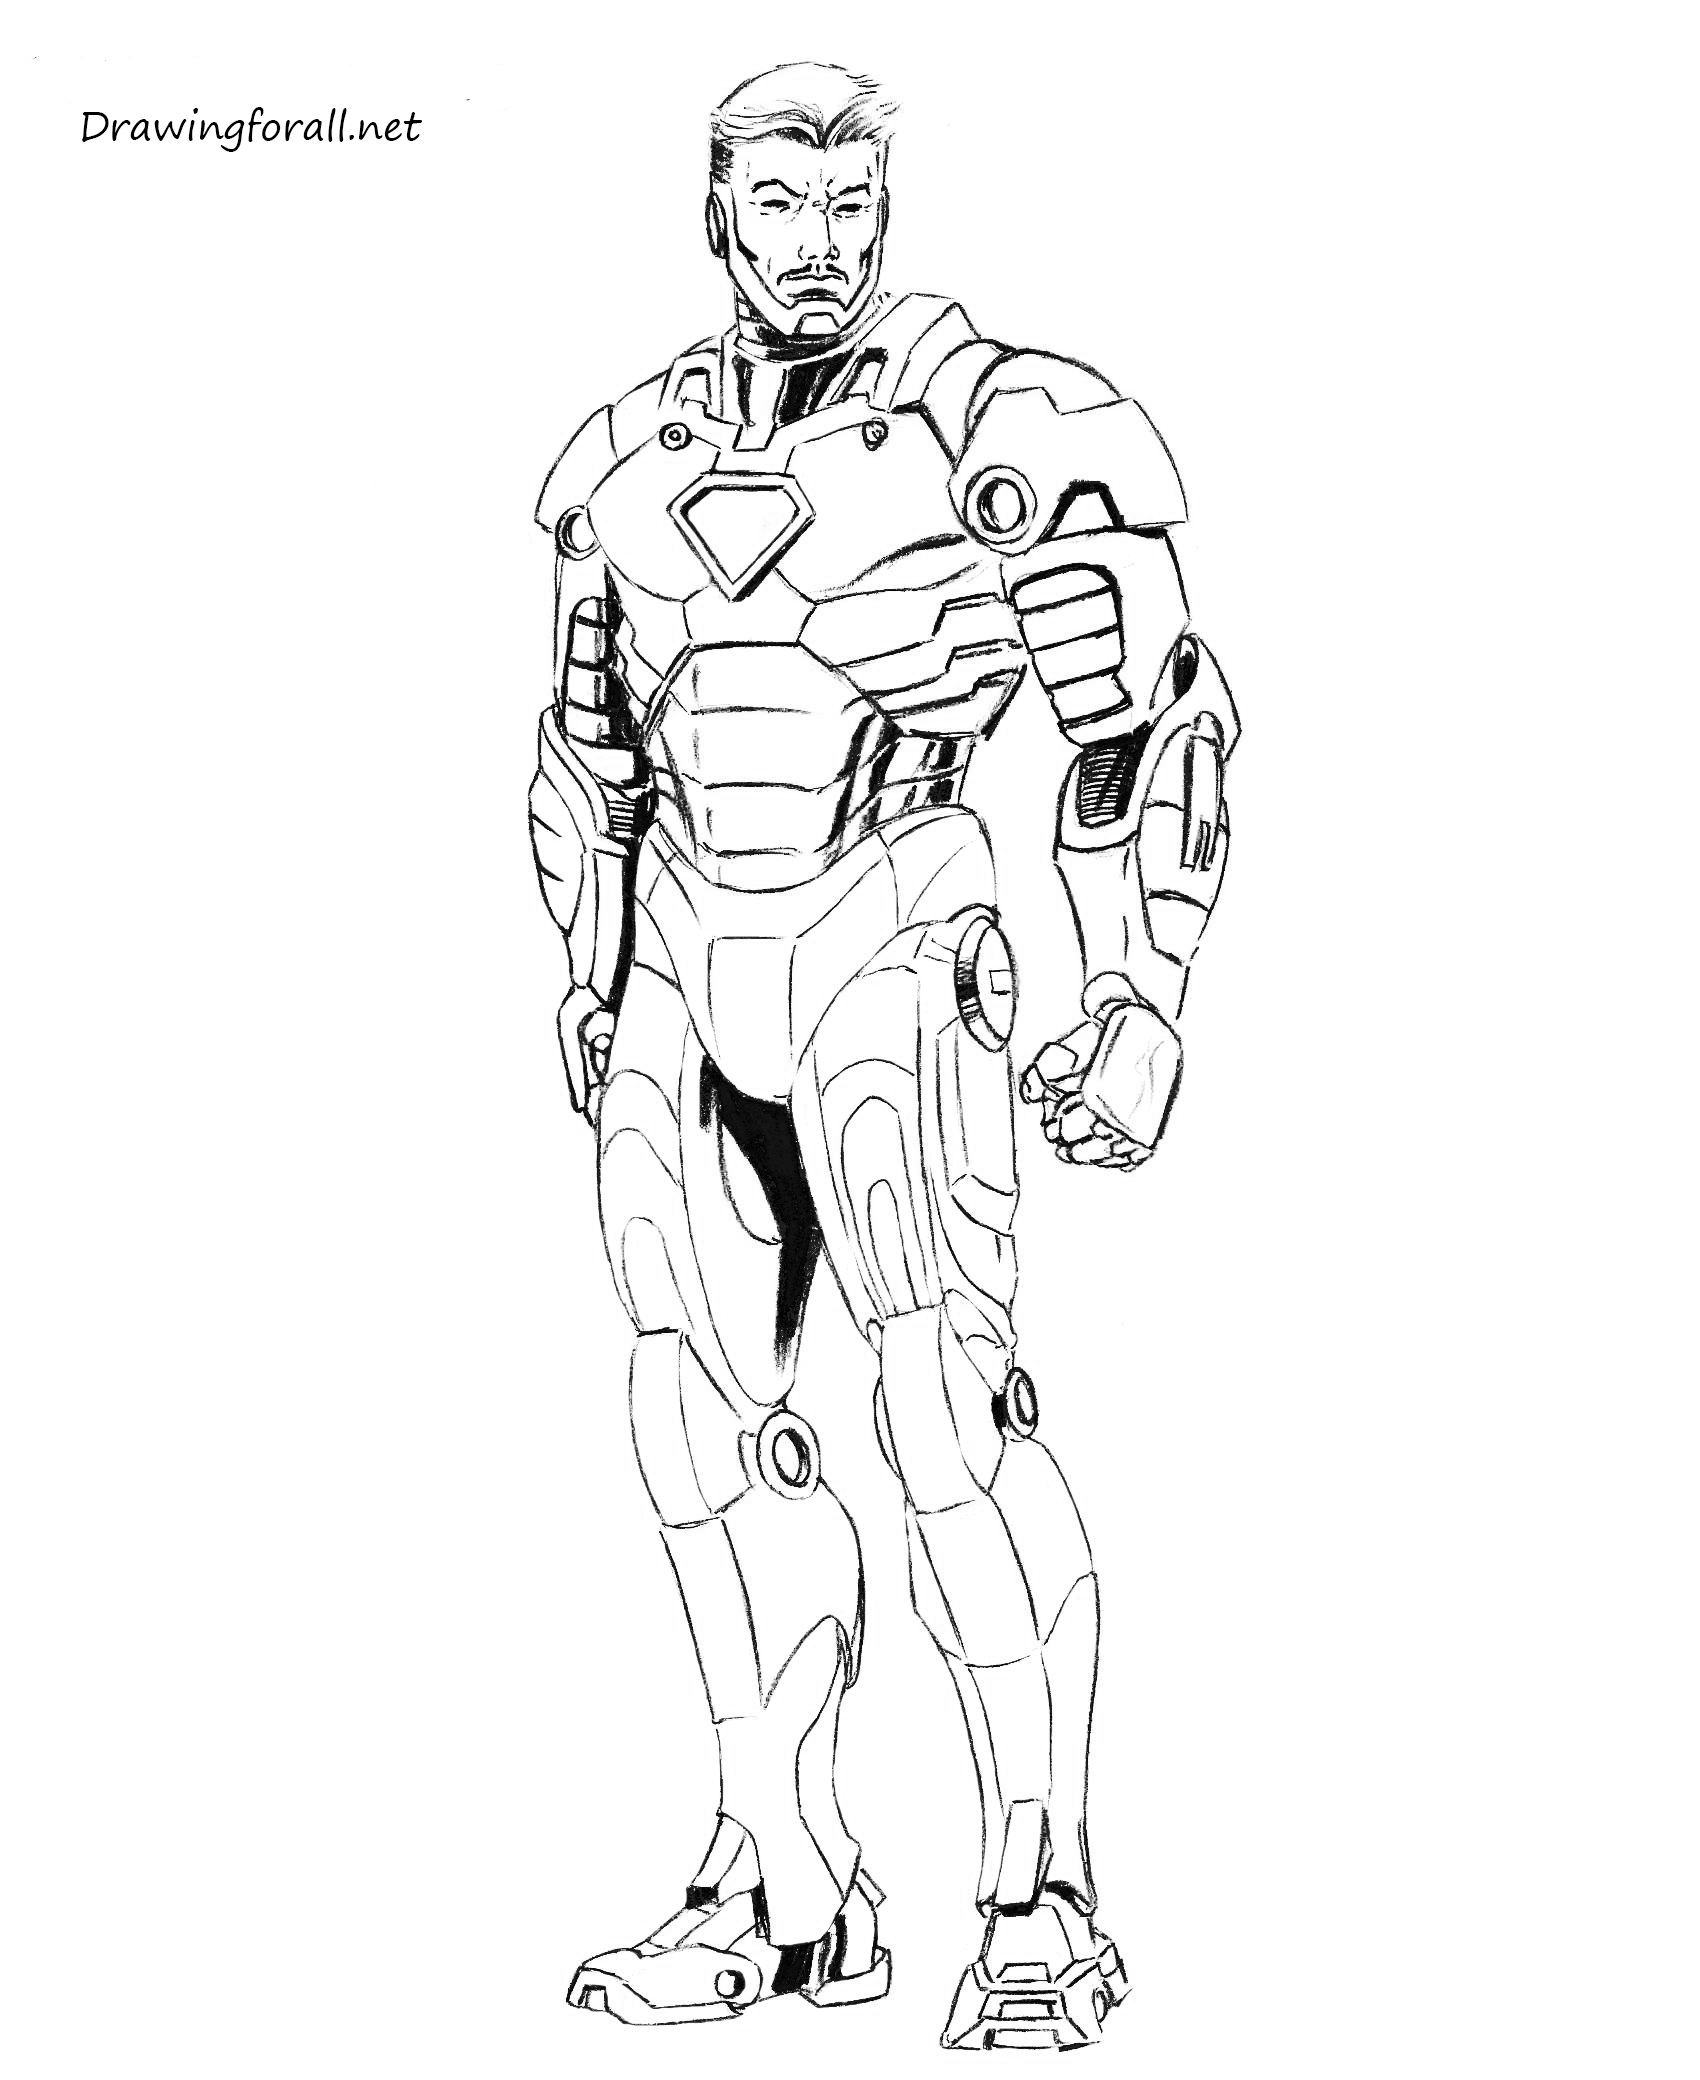 How to draw Iron Man step by step | DrawingForAll.net